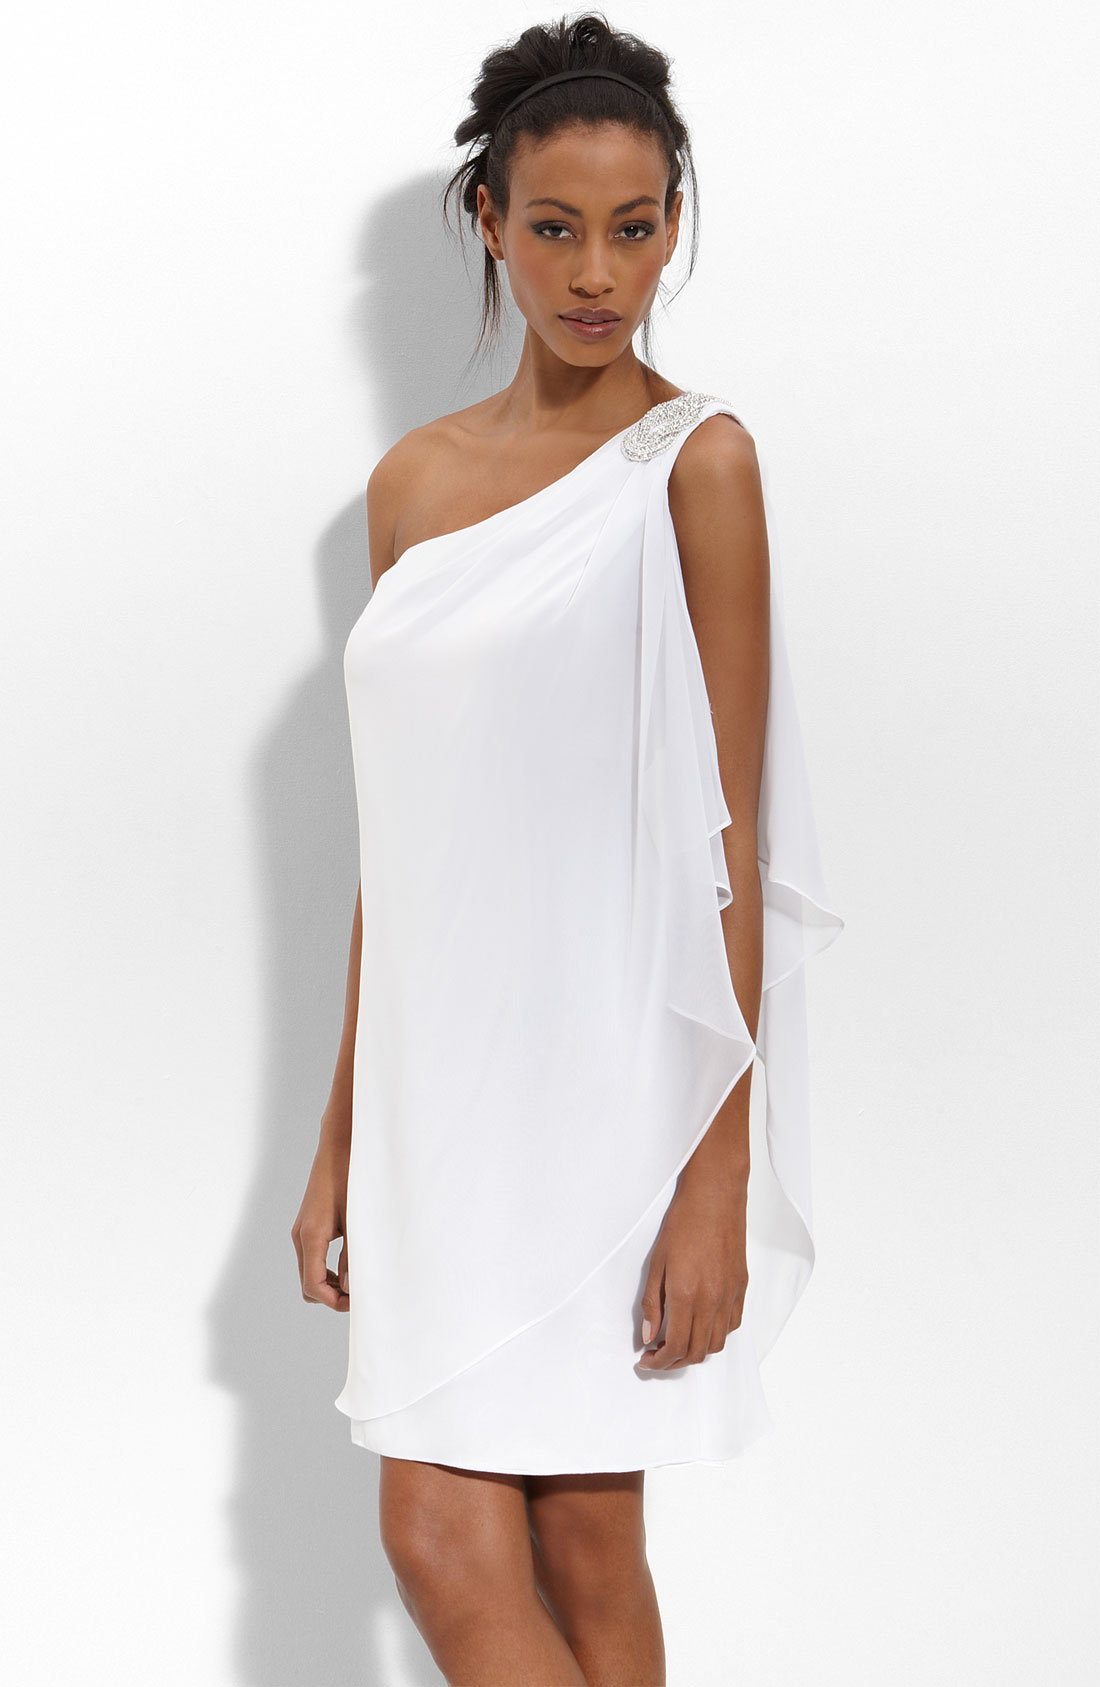 Collection One Shoulder White Dresses Pictures - Reikian